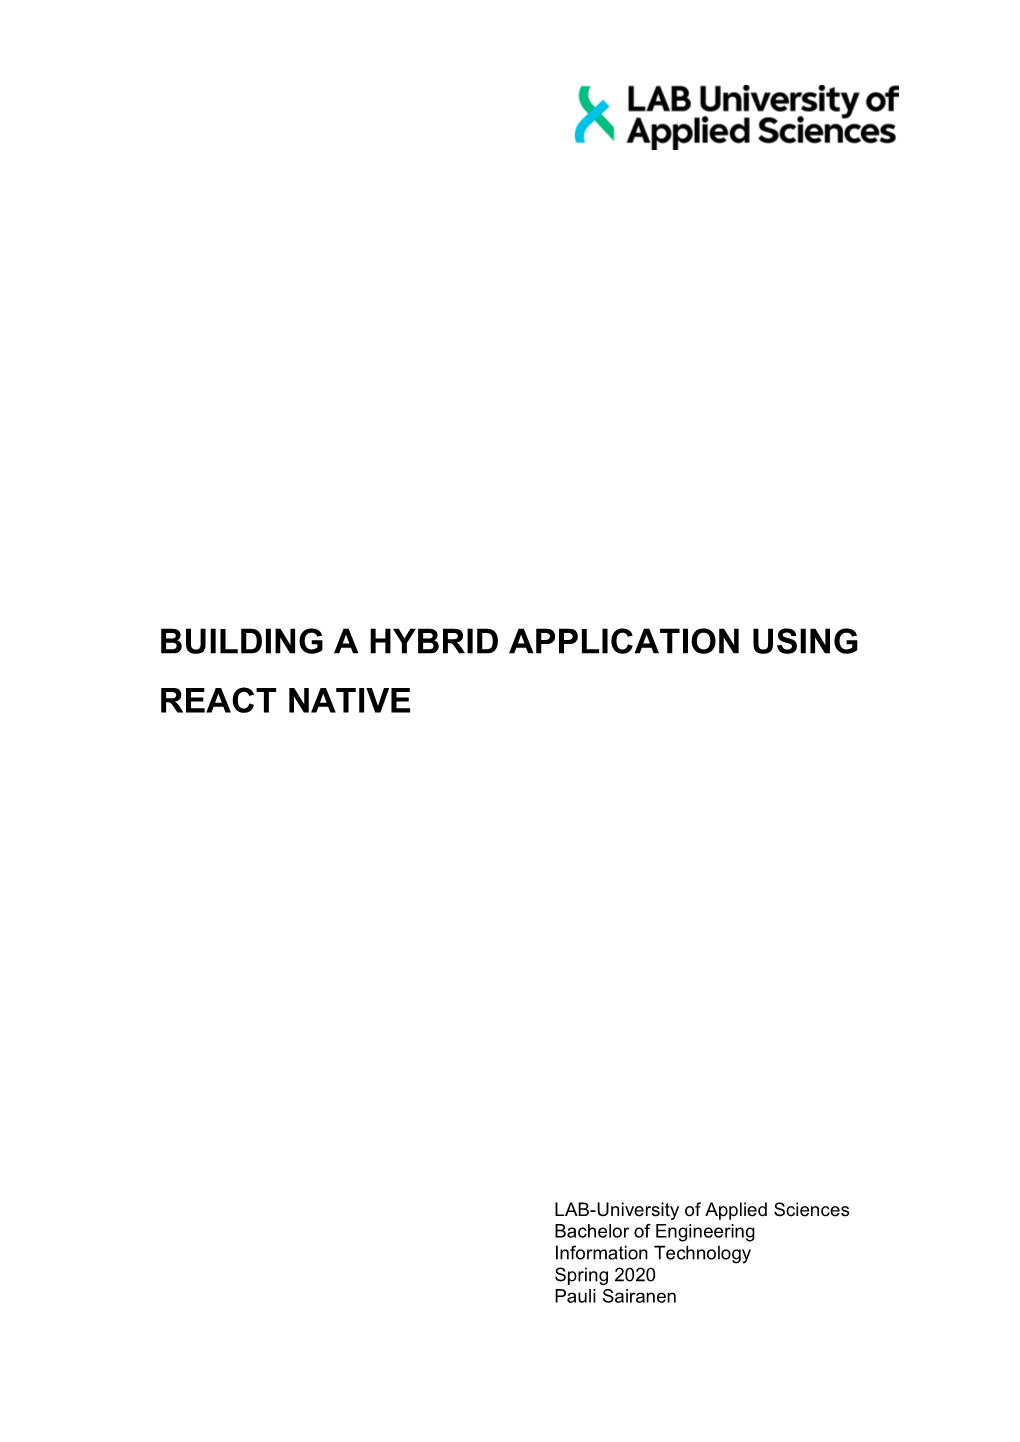 Building a Hybrid Application Using React Native